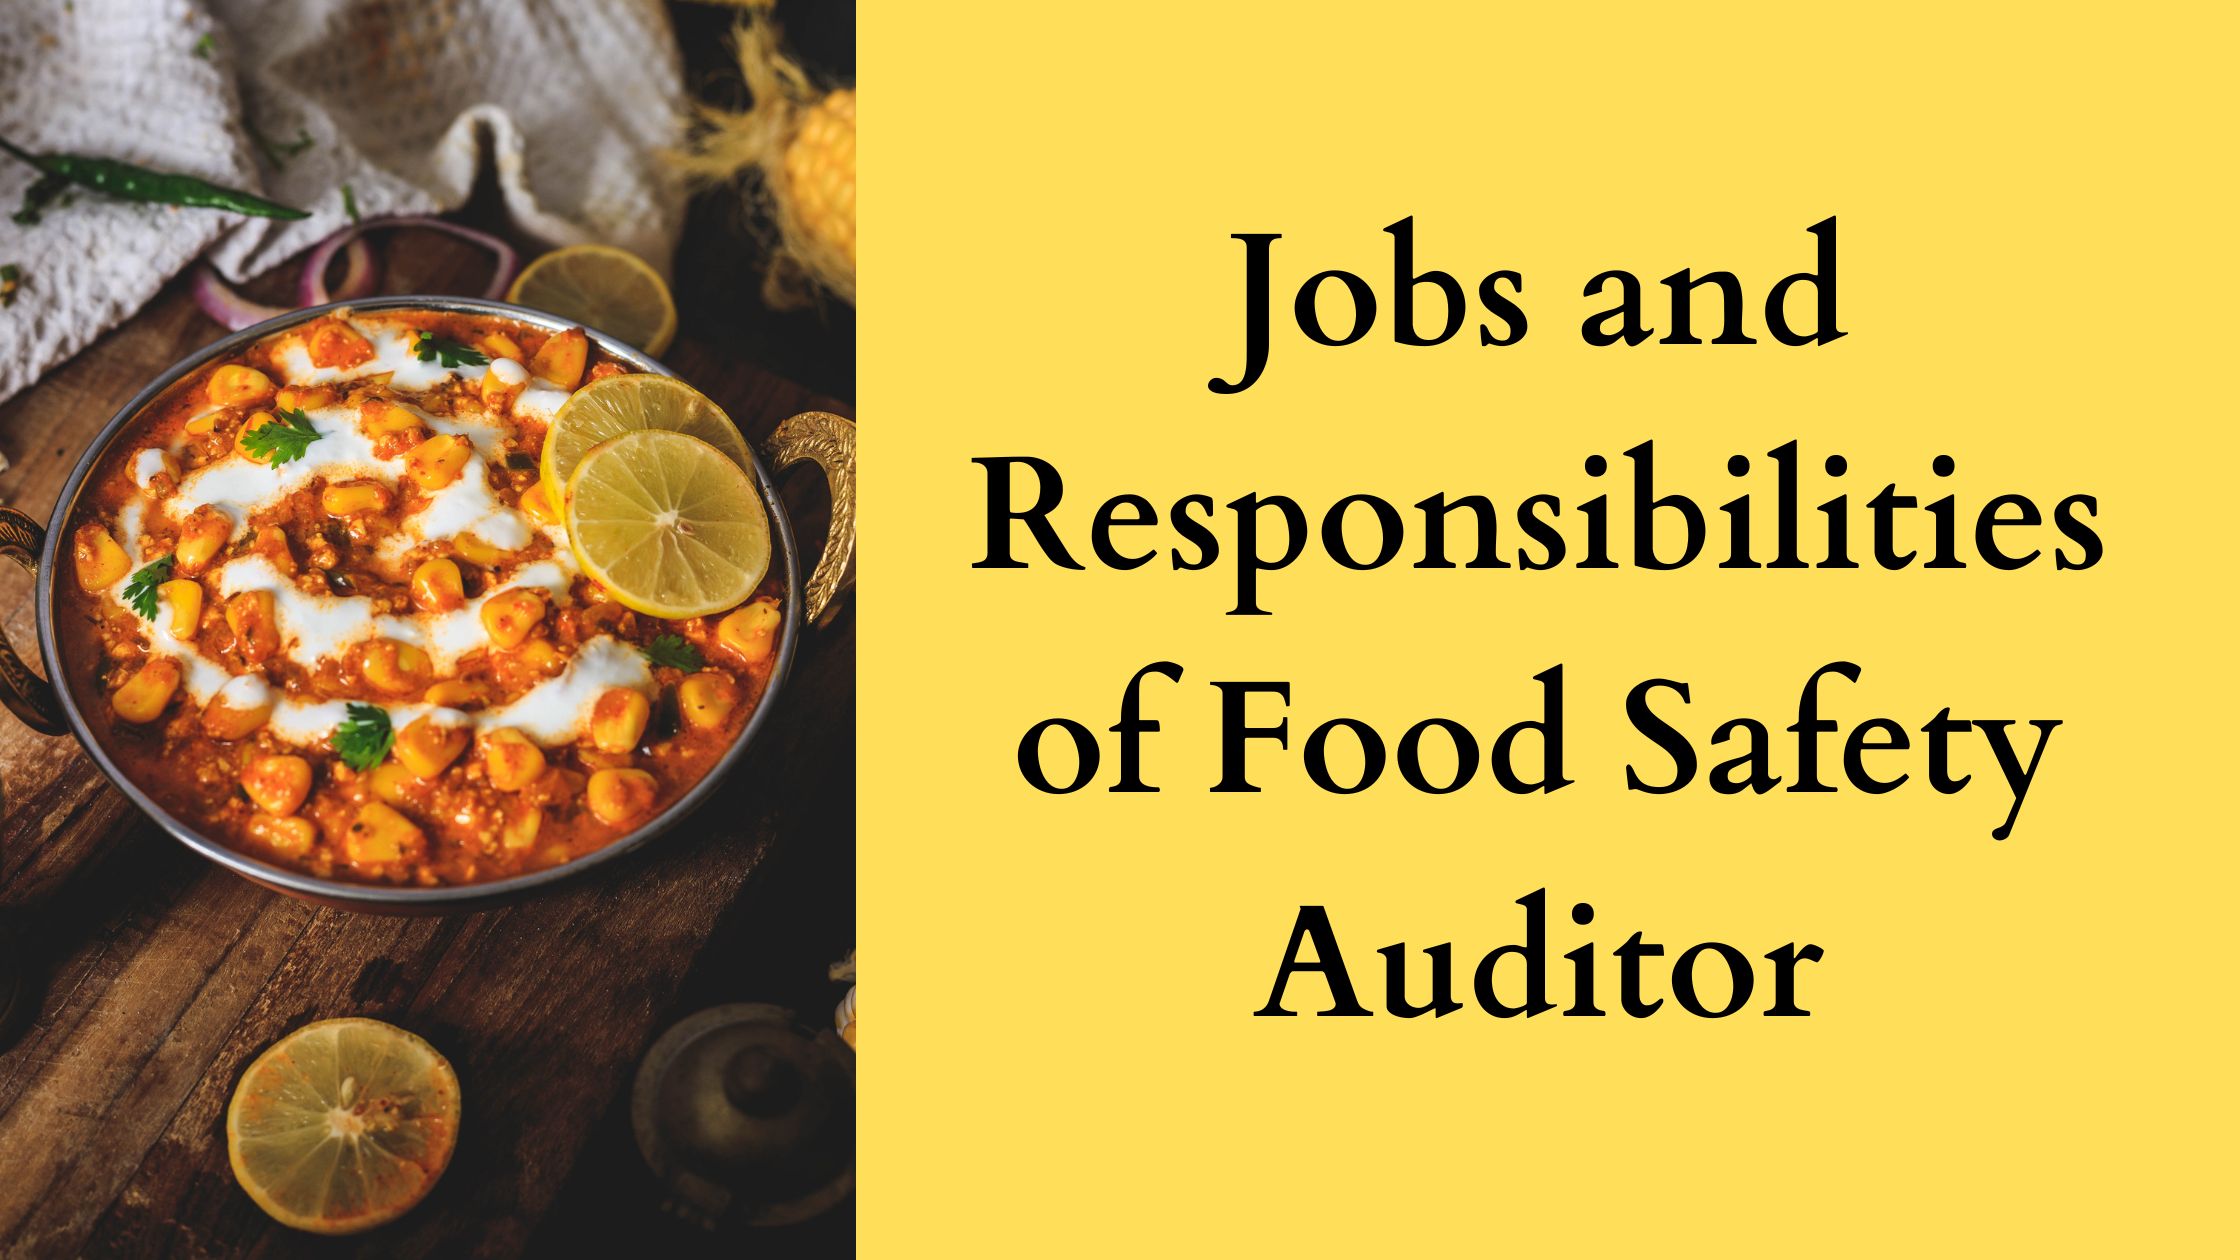 Jobs and Responsibilities of Food Safety Auditor